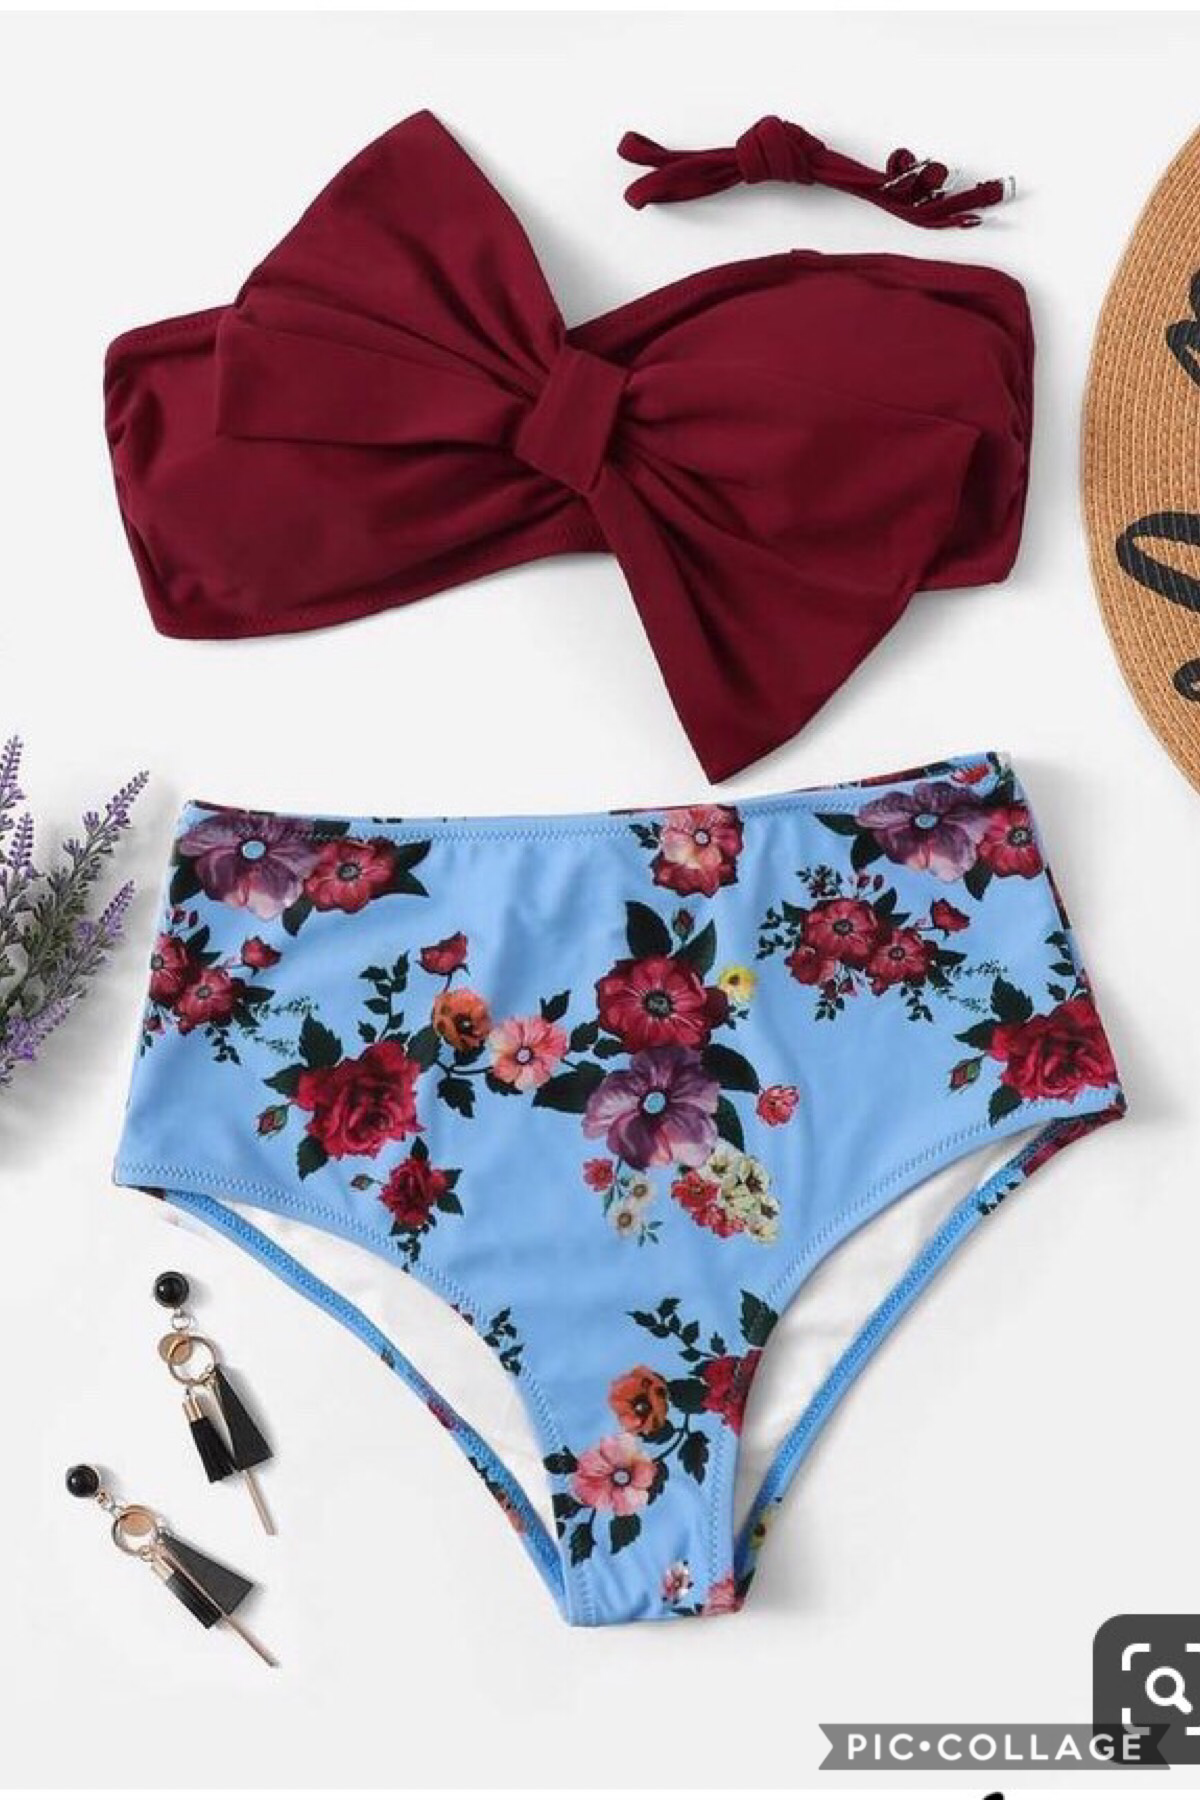 I want this swimsuit so bad!😫
6-11-19